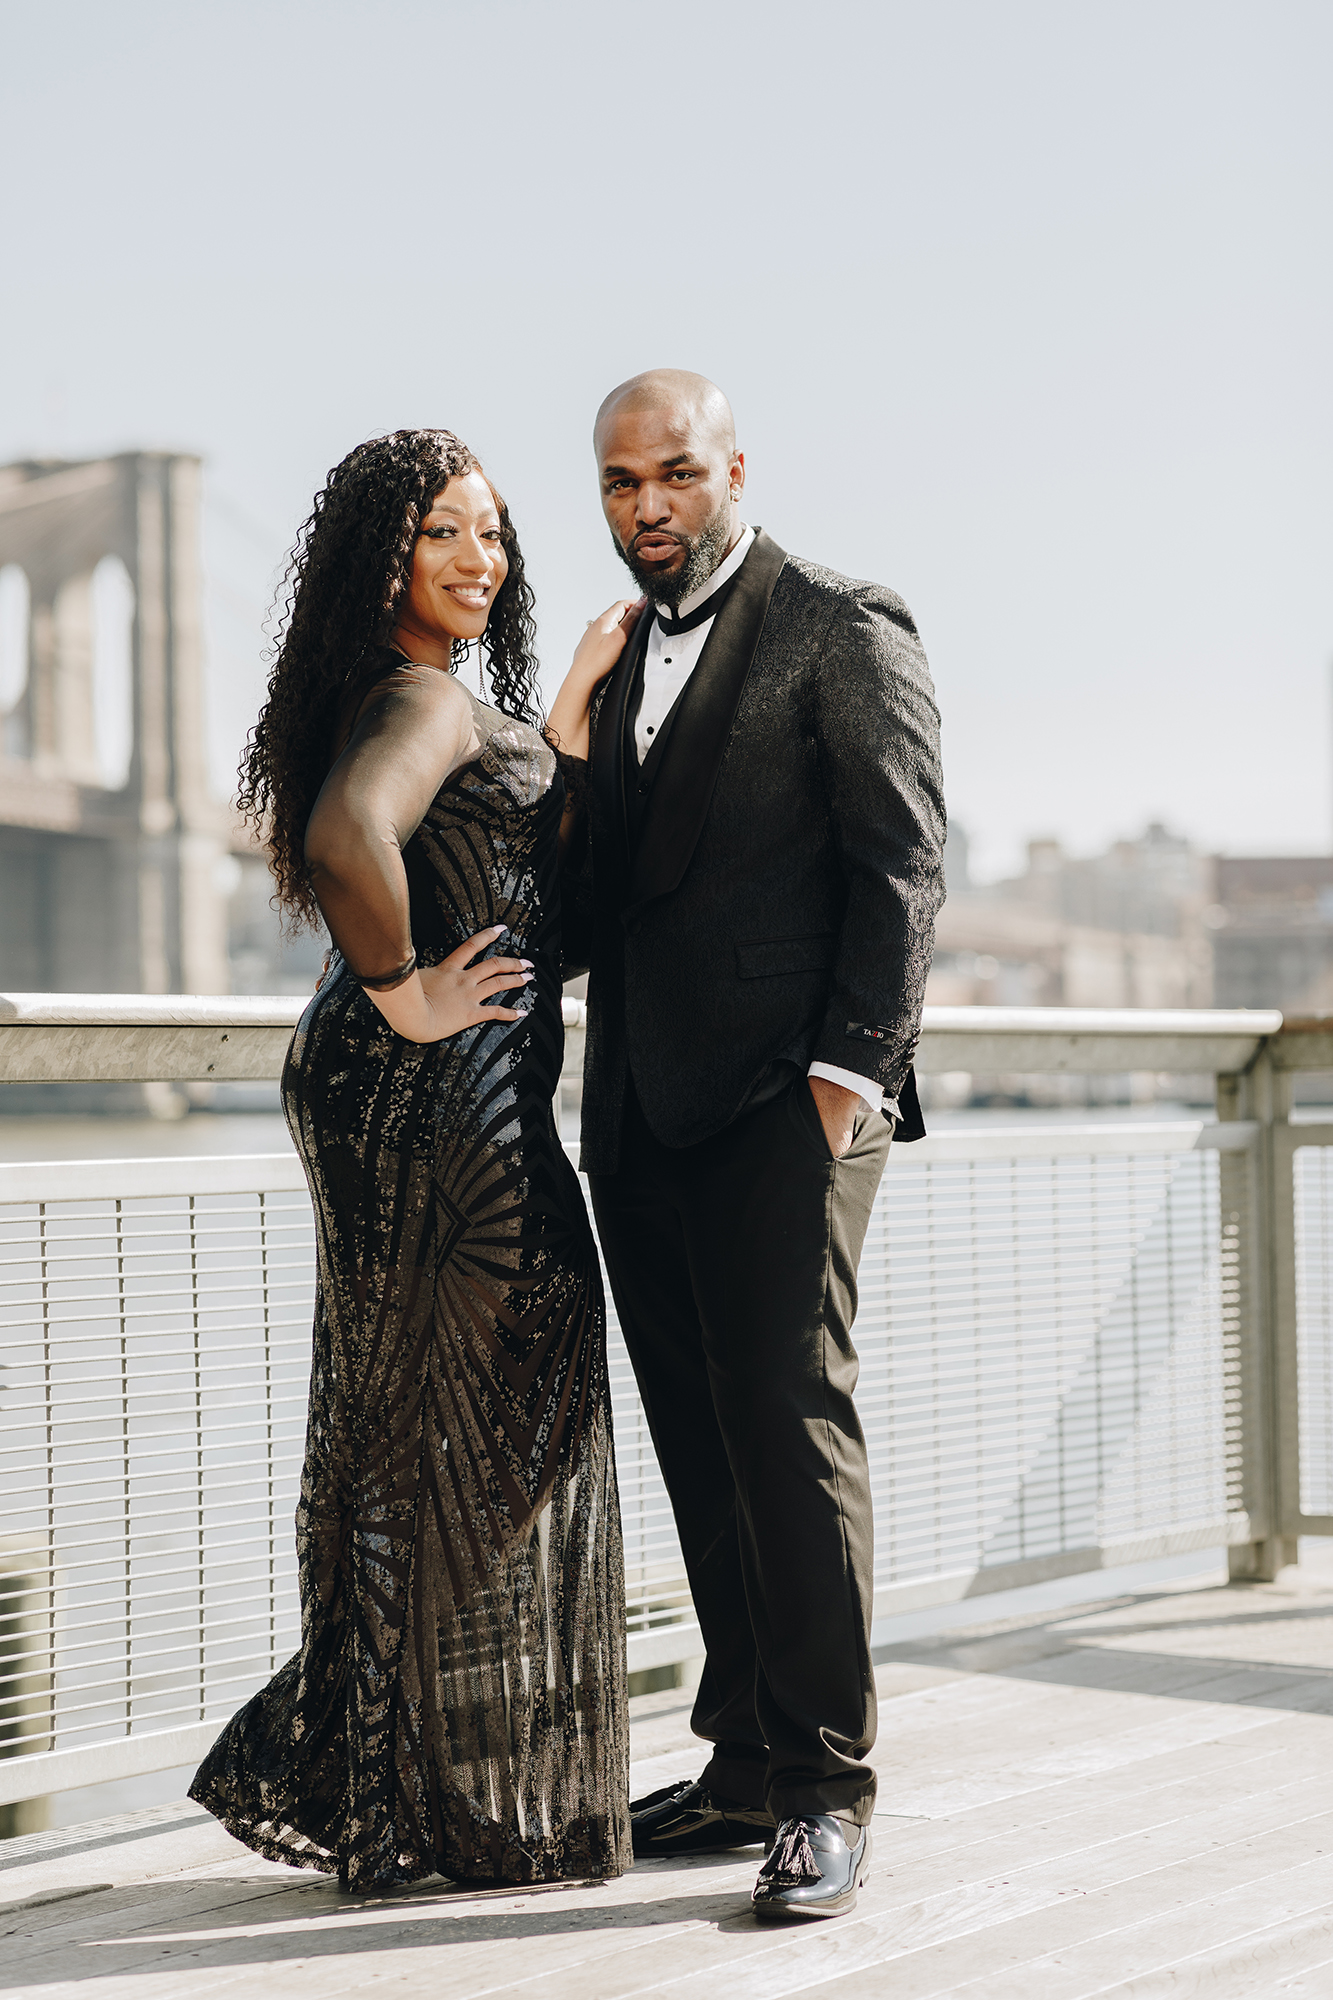 Fashionable Wintery South Street Seaport Engagement Photography